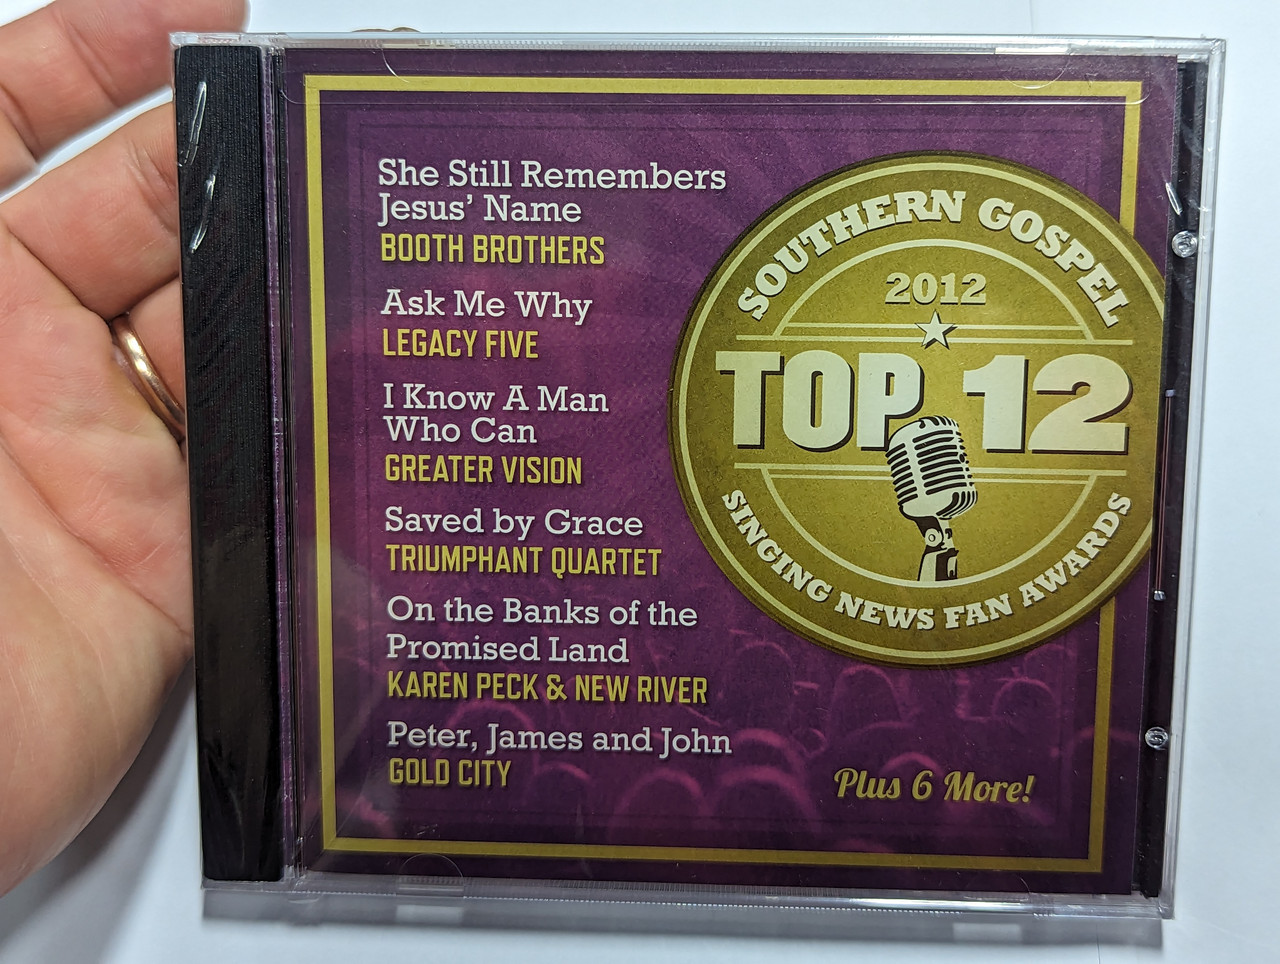 https://cdn10.bigcommerce.com/s-62bdpkt7pb/products/0/images/303417/Singing_News_Fan_Awards_Top_12_Southern_Gospel_Songs_Of_2012_She_Still_Remembers_Jesus_Name_-_Booth_Brothers_Ask_Me_Why_-_Legacy_Five_I_Know_A_Man_Who_Can_-_Greater_Vision_Saved_by_Grace_1__10609.1697040392.1280.1280.jpg?c=2&_gl=1*96m6am*_ga*MjA2NTIxMjE2MC4xNTkwNTEyNTMy*_ga_WS2VZYPC6G*MTY5NzAyOTYwNy4xMDk3LjEuMTY5NzA0MDE2Ny41OC4wLjA.